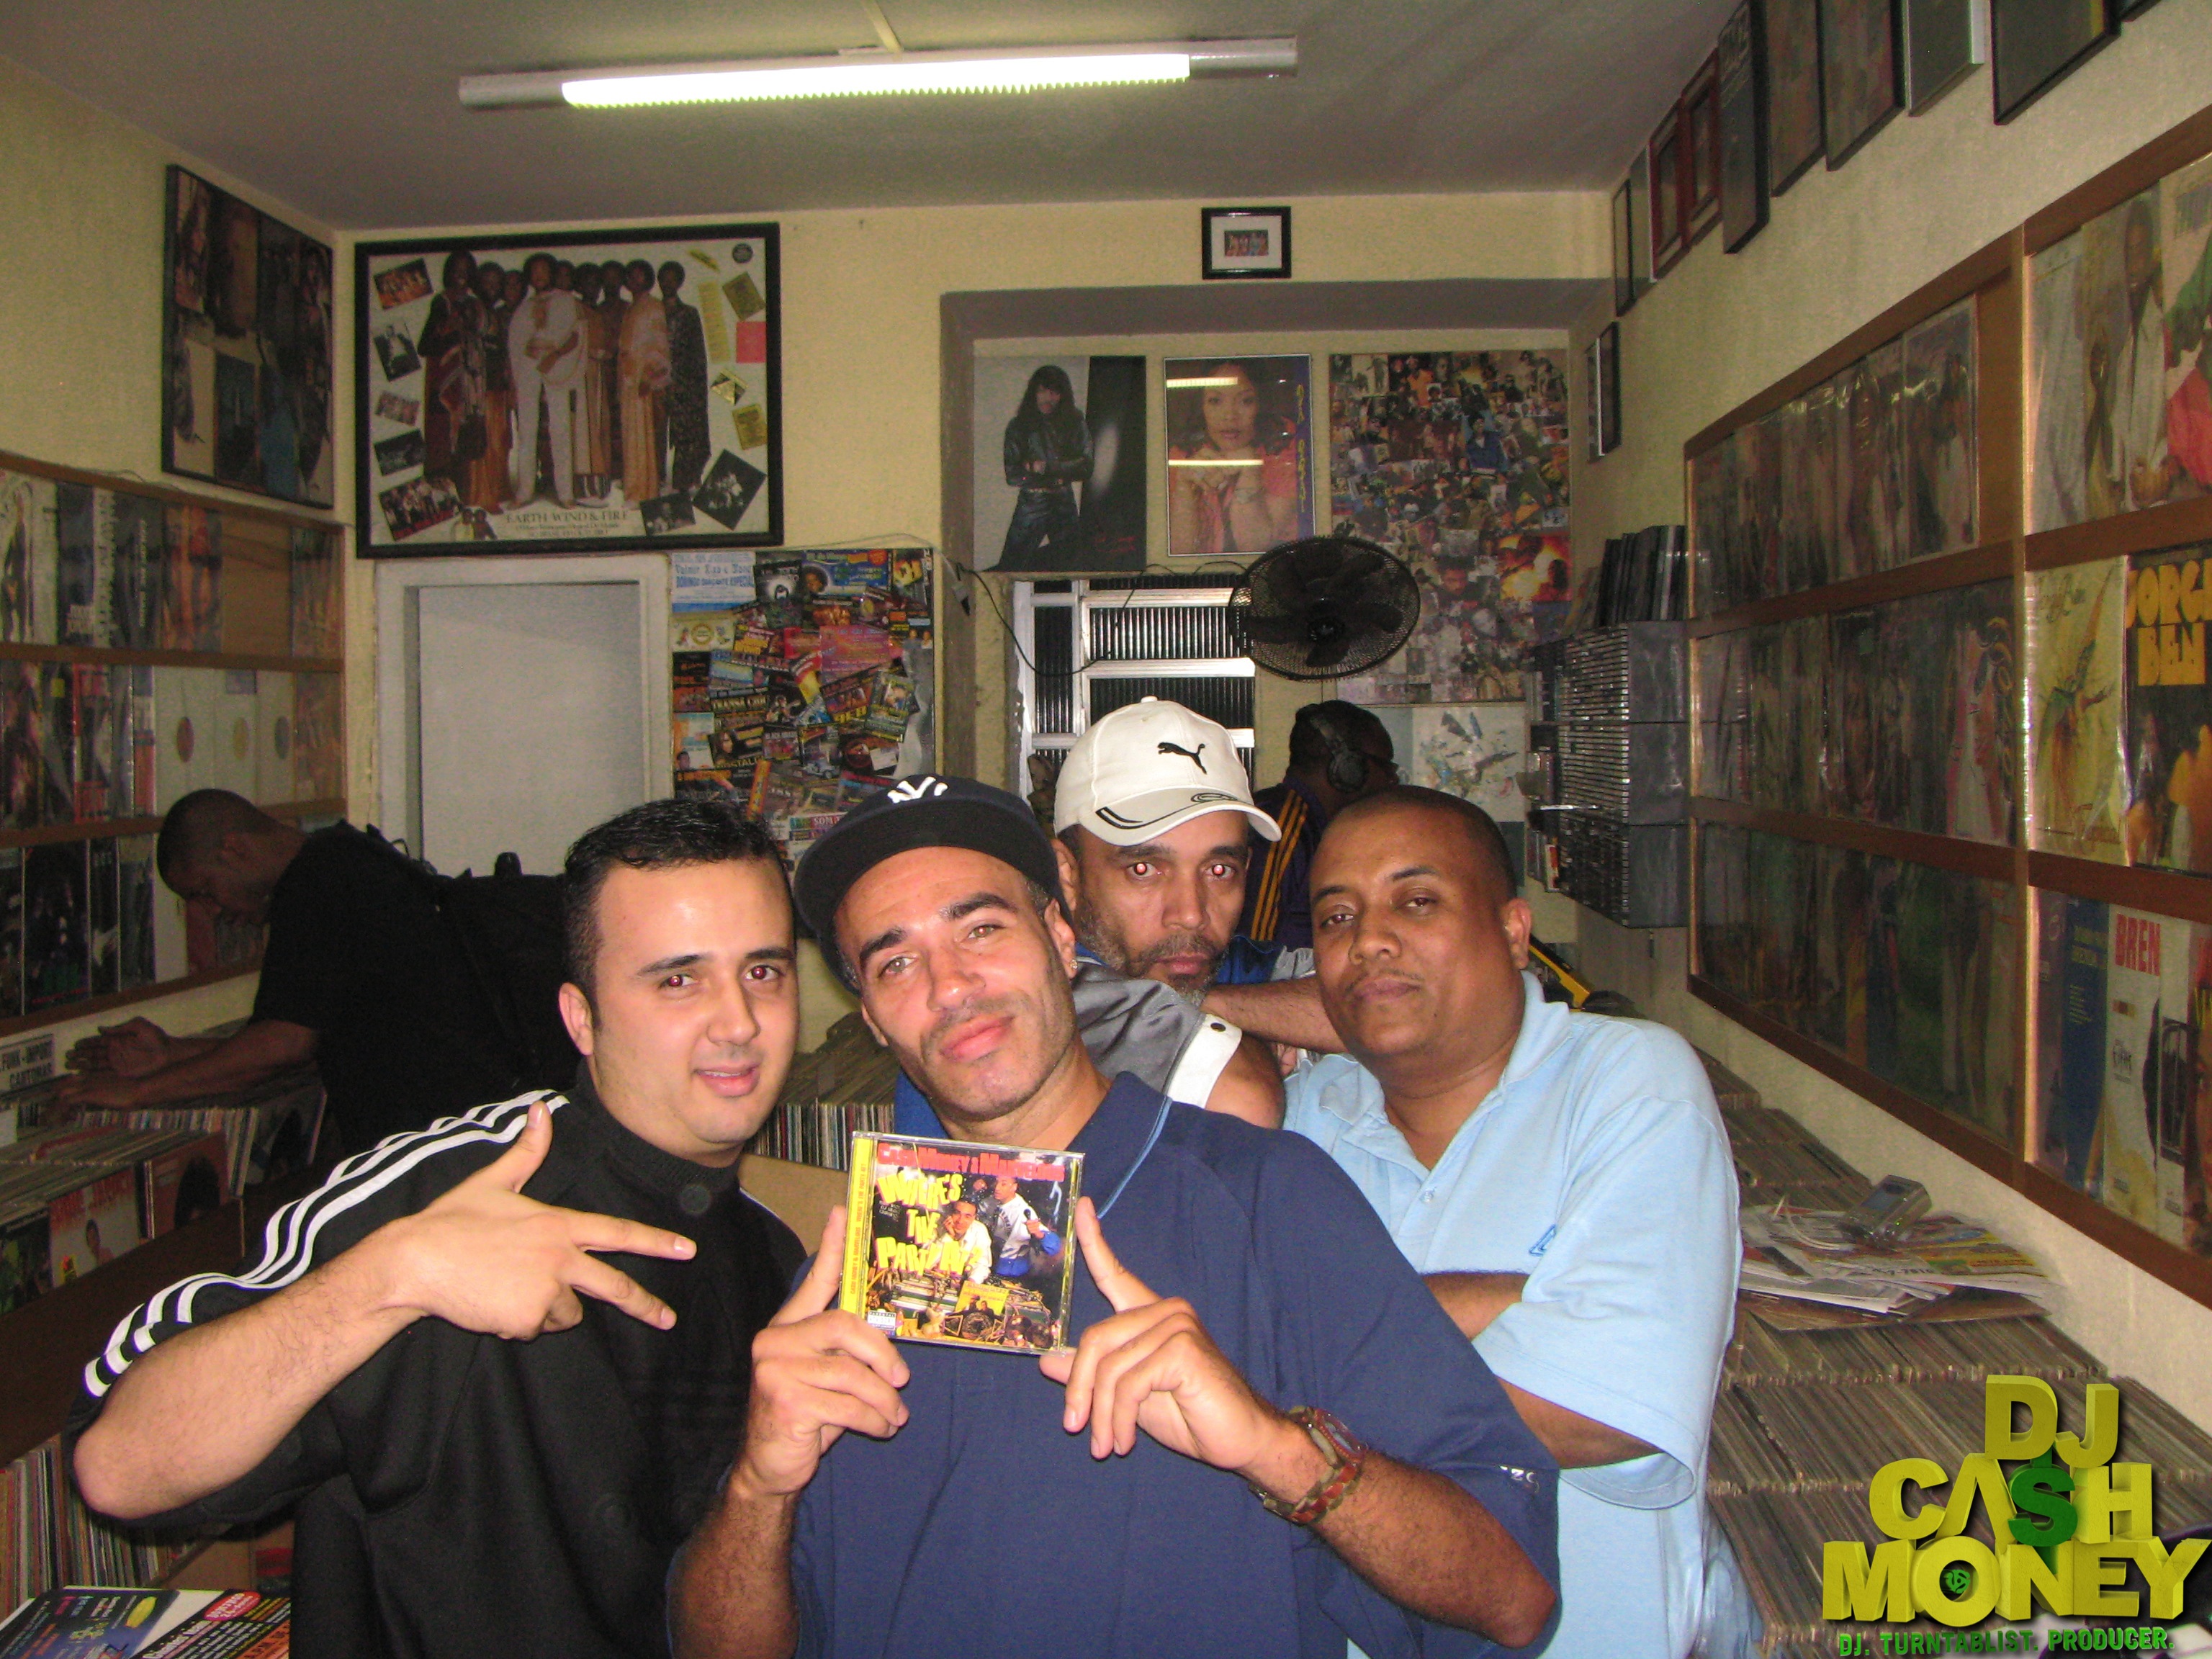 A record store in Brazil with my cd